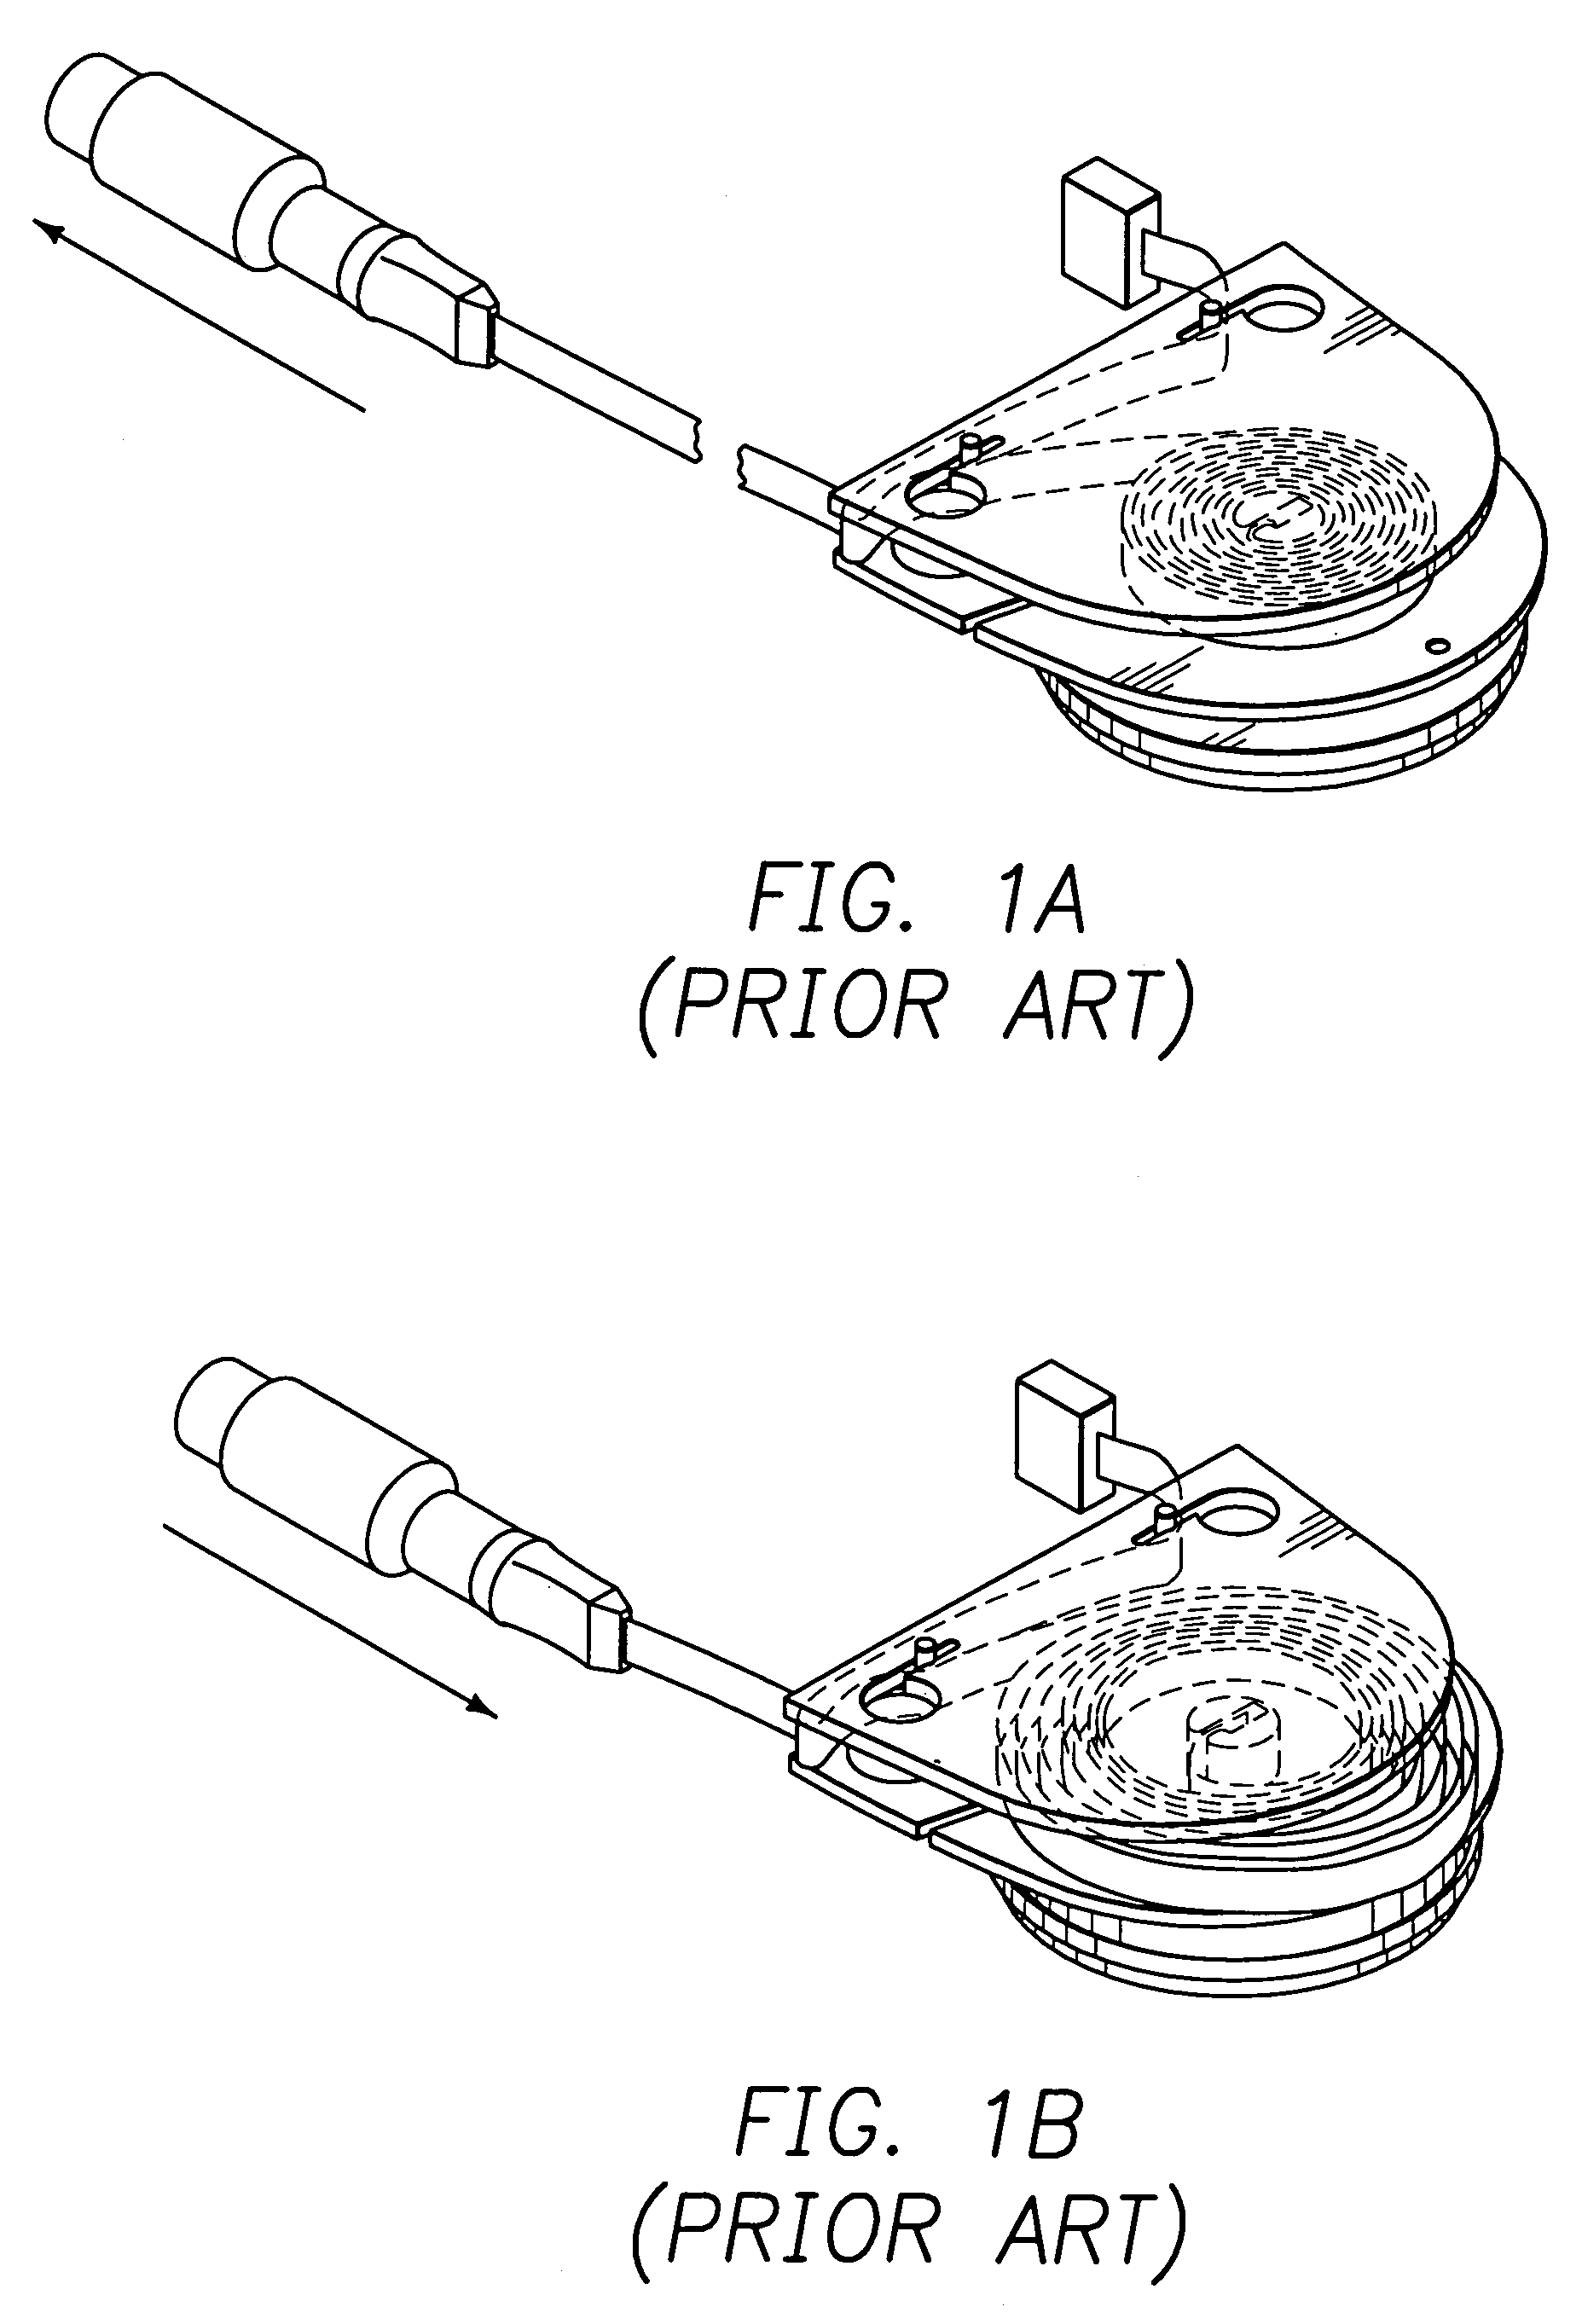 Pointing device with a cable storage winding mechanism